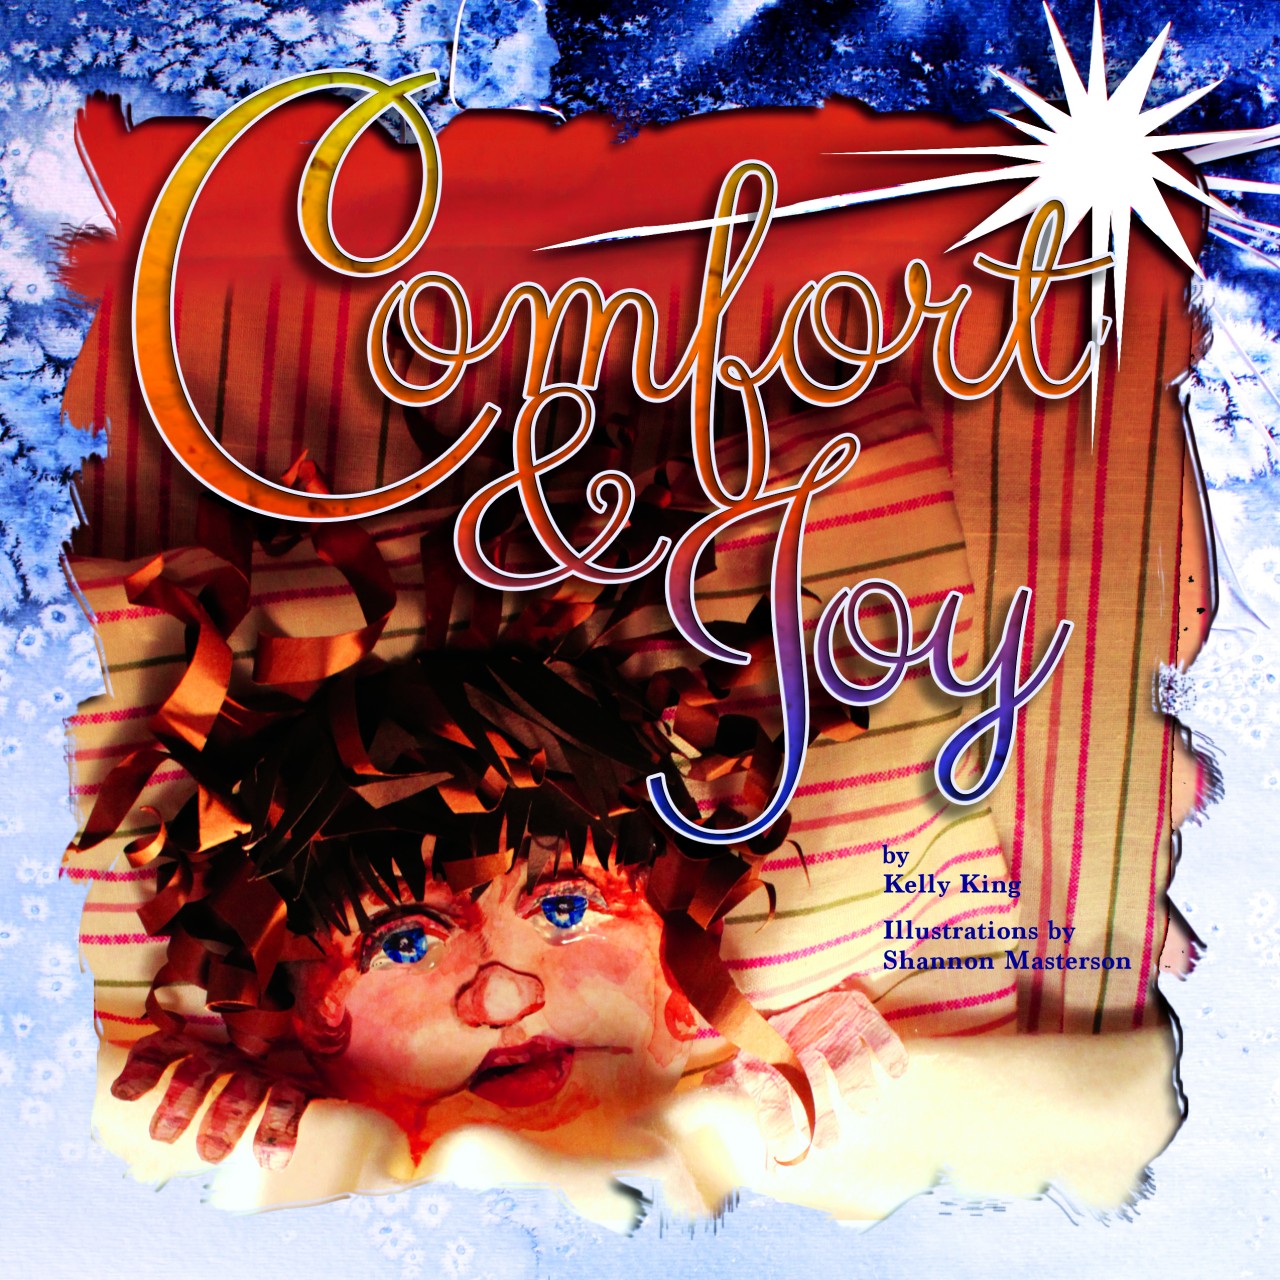  Comfort and Joy is the book that will be read this year at Bethany, Council Road’s candlelight services. 